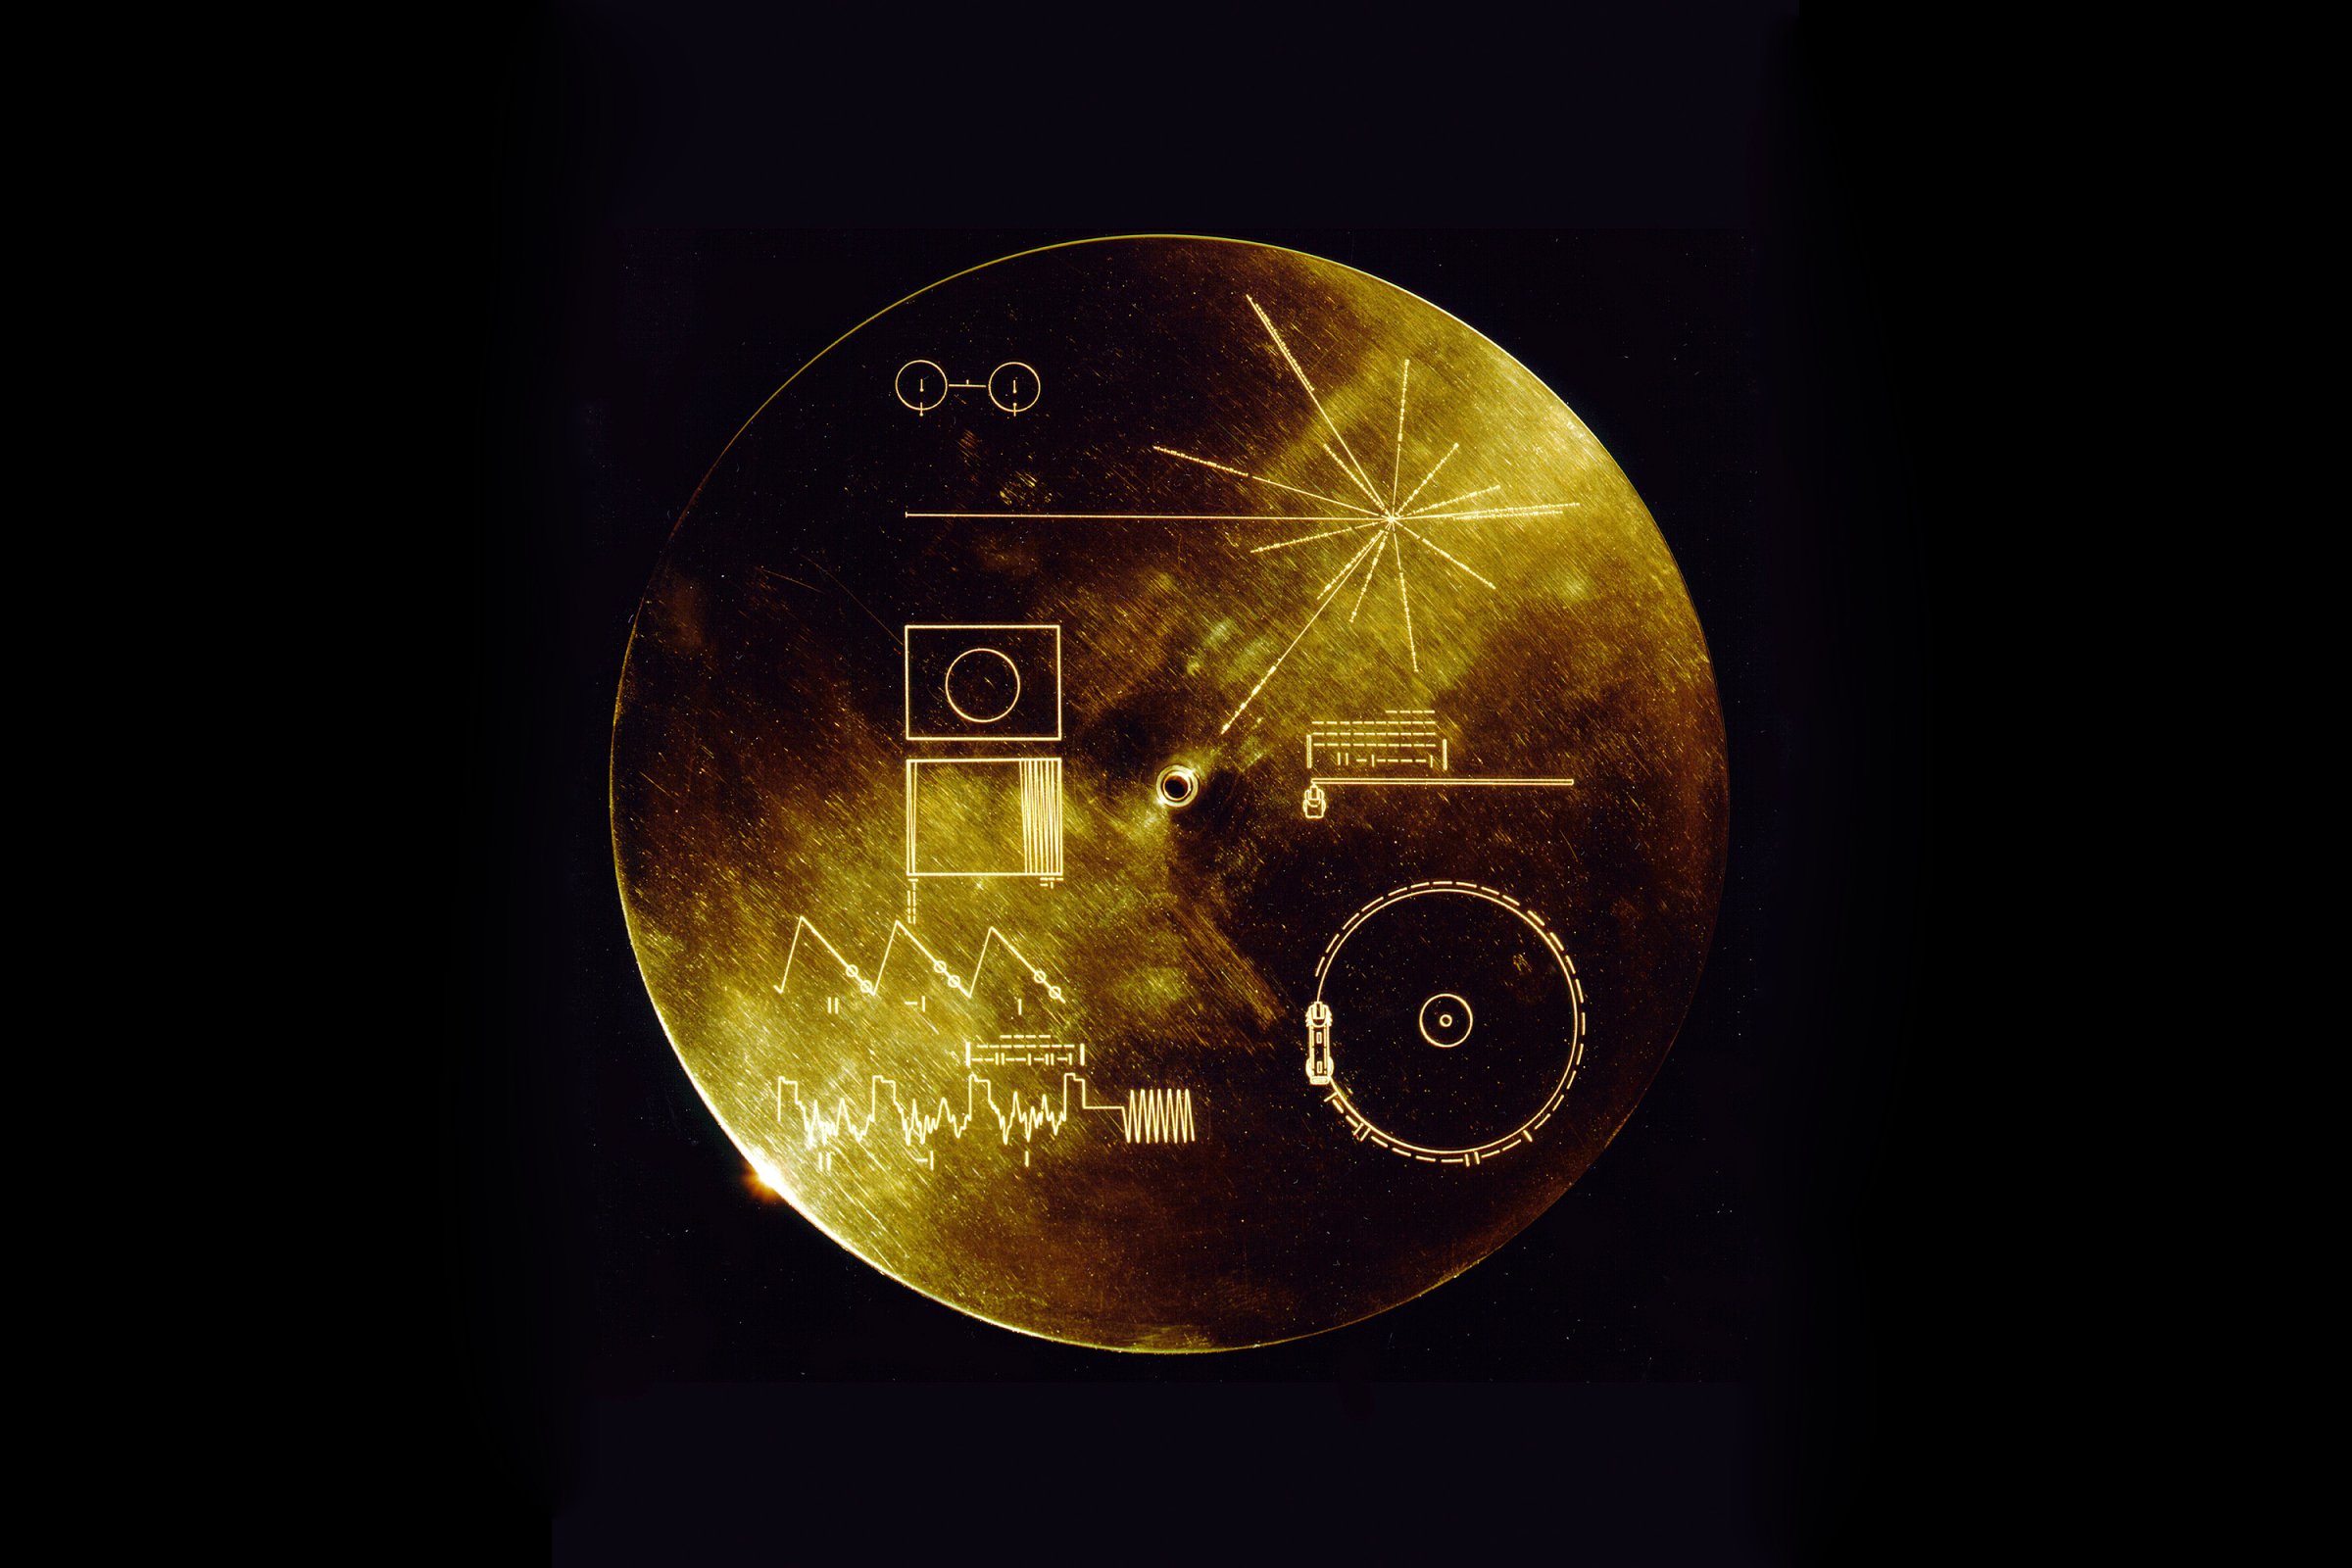 This gold aluminum cover was designed to protect the Voyager 1 and 2 'Sounds of Earth' gold-plated record from micrometeorite bombardment, but also serves a double purpose in providing the finder a key to playing the record. The explanatory diagram appears on both the inner and outer surfaces of the cover, as the outer diagram will be eroded in time. Flying aboard Voyagers 1 and 2 are identical golden records, carrying the story of Earth far into deep space. The 12 inch gold-plated copper discs contain greetings in 60 languages, samples of music from different cultures and eras, and natural and man-made sounds from Earth.